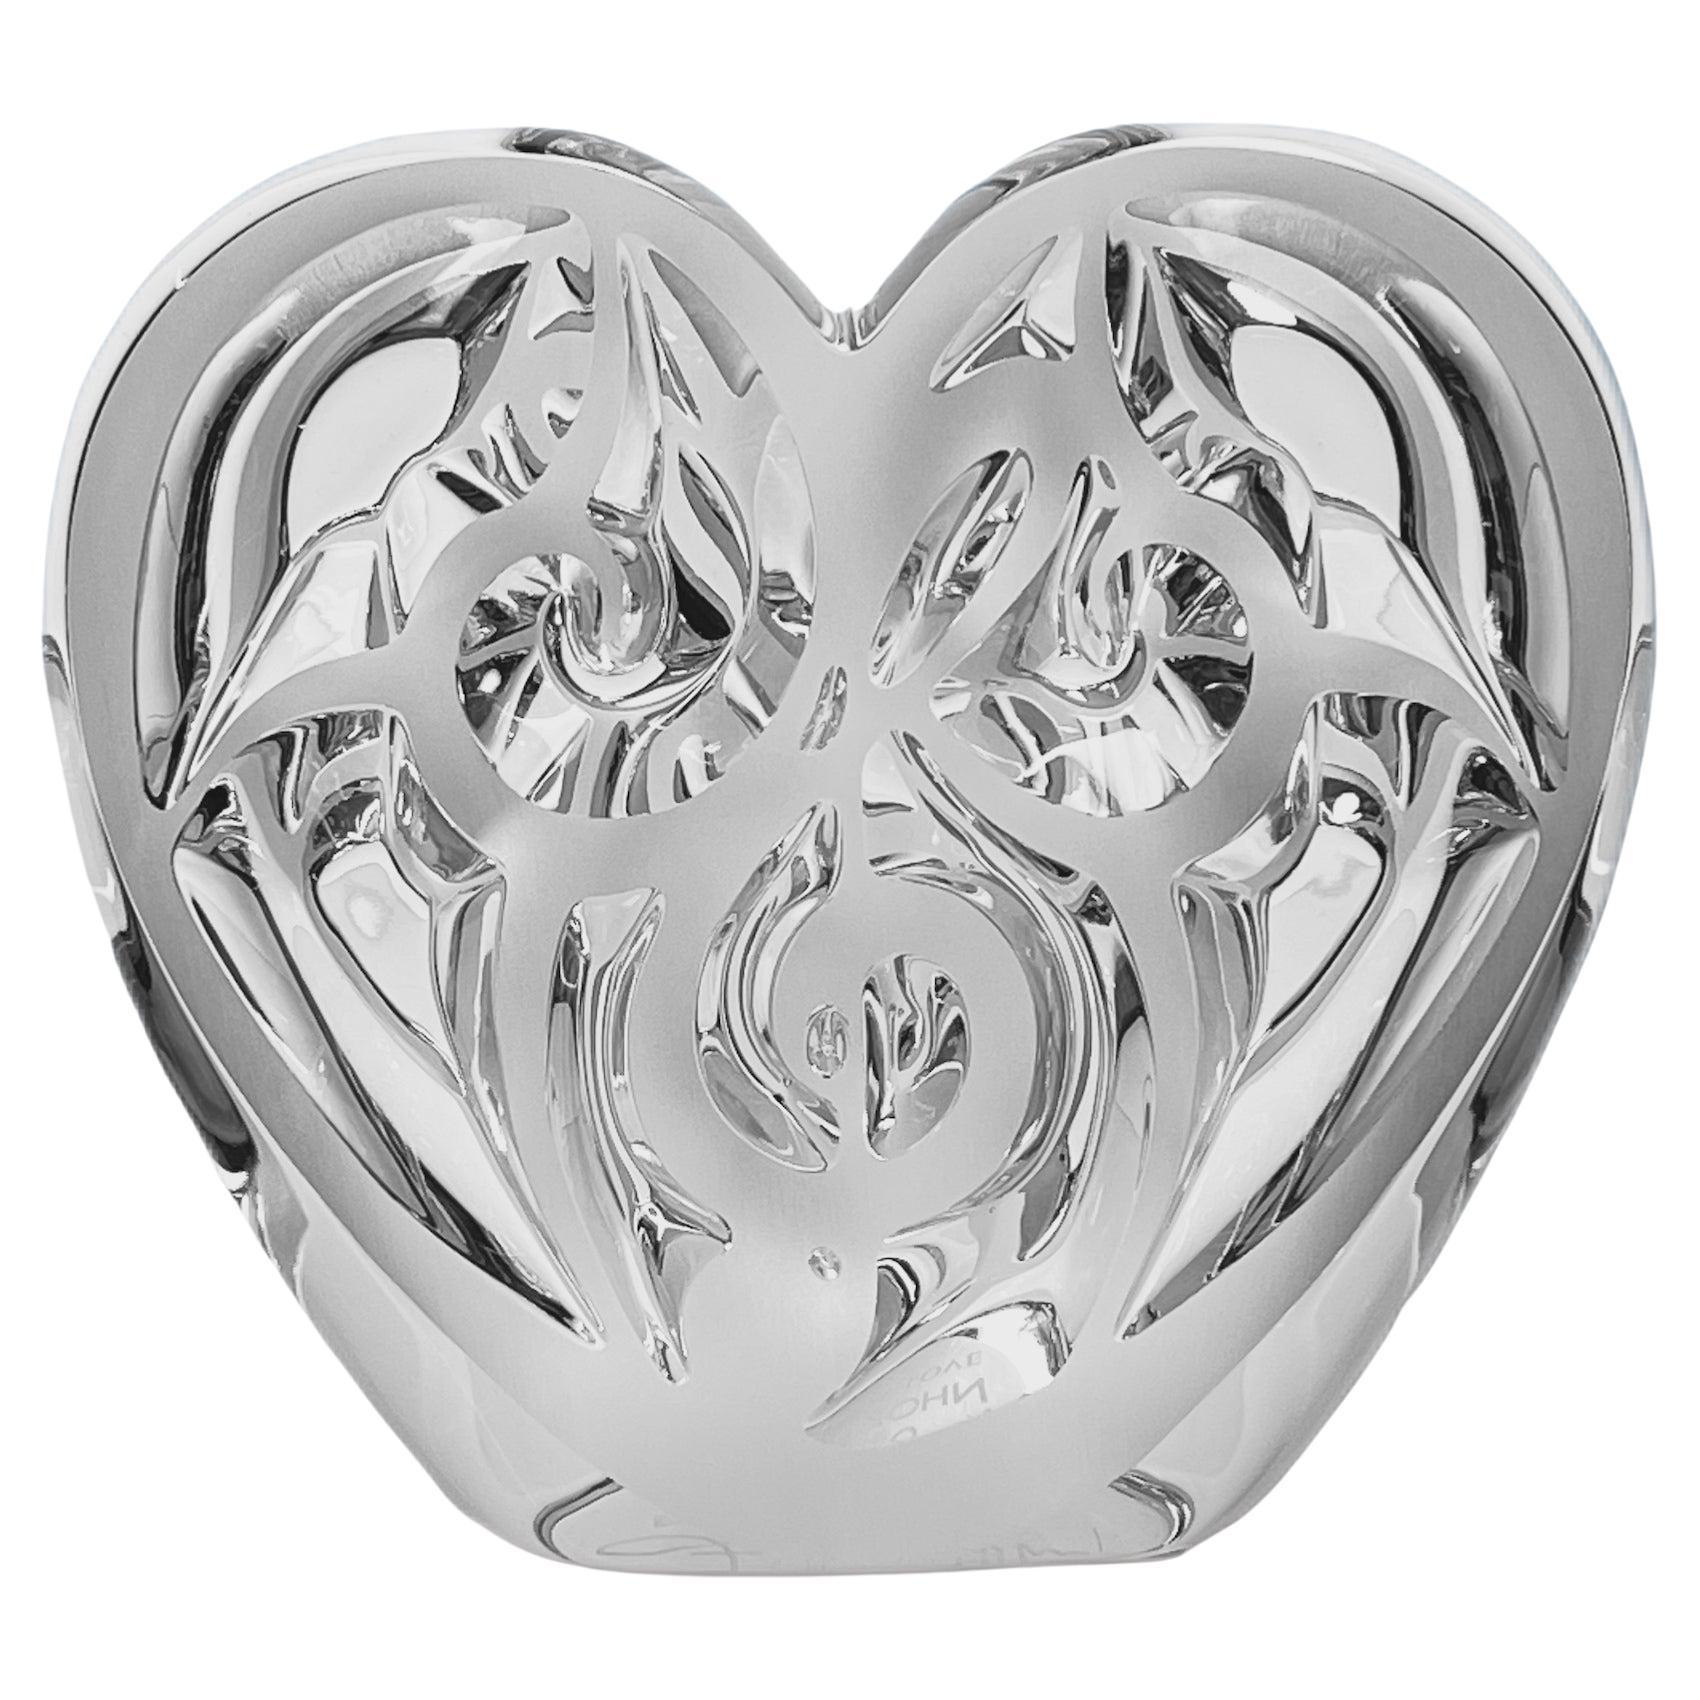 Modern Crystal Glass Sculpture Entitled “Music is Love" by Lalique For Sale